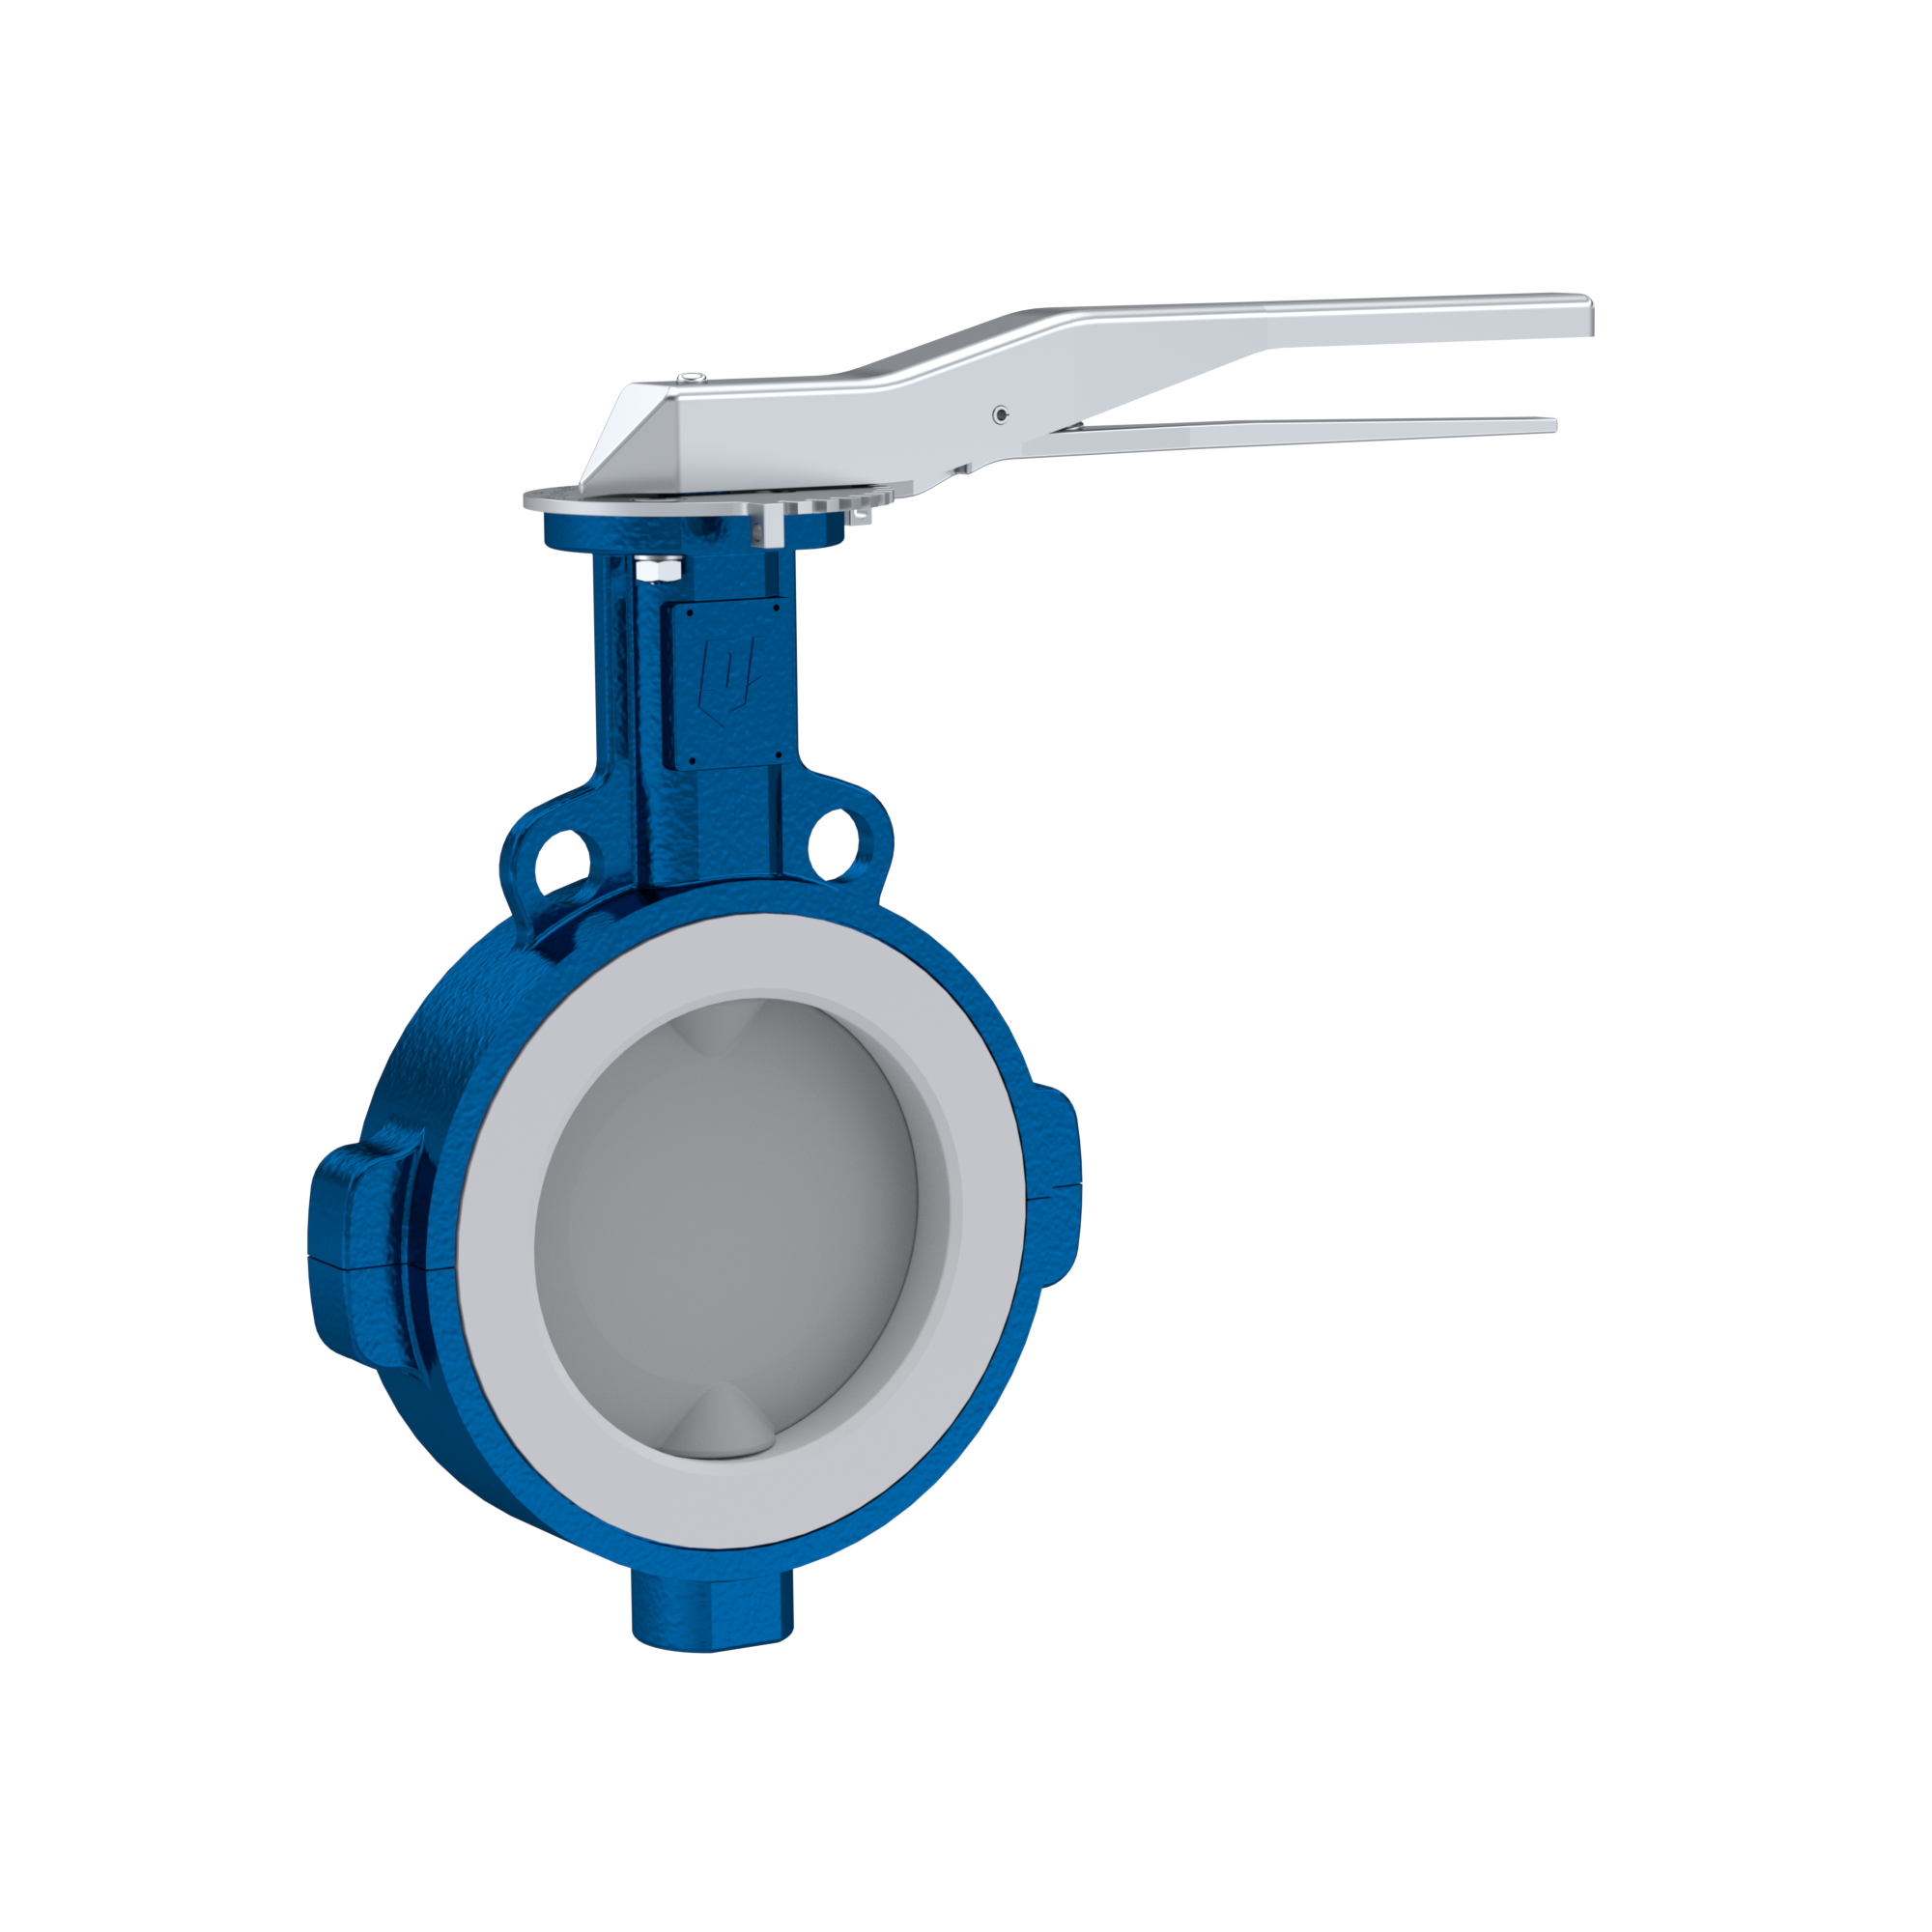 PFA-Butterfly-valve PTFE AK09 DN250 PN10-PN16 lever silicone insert